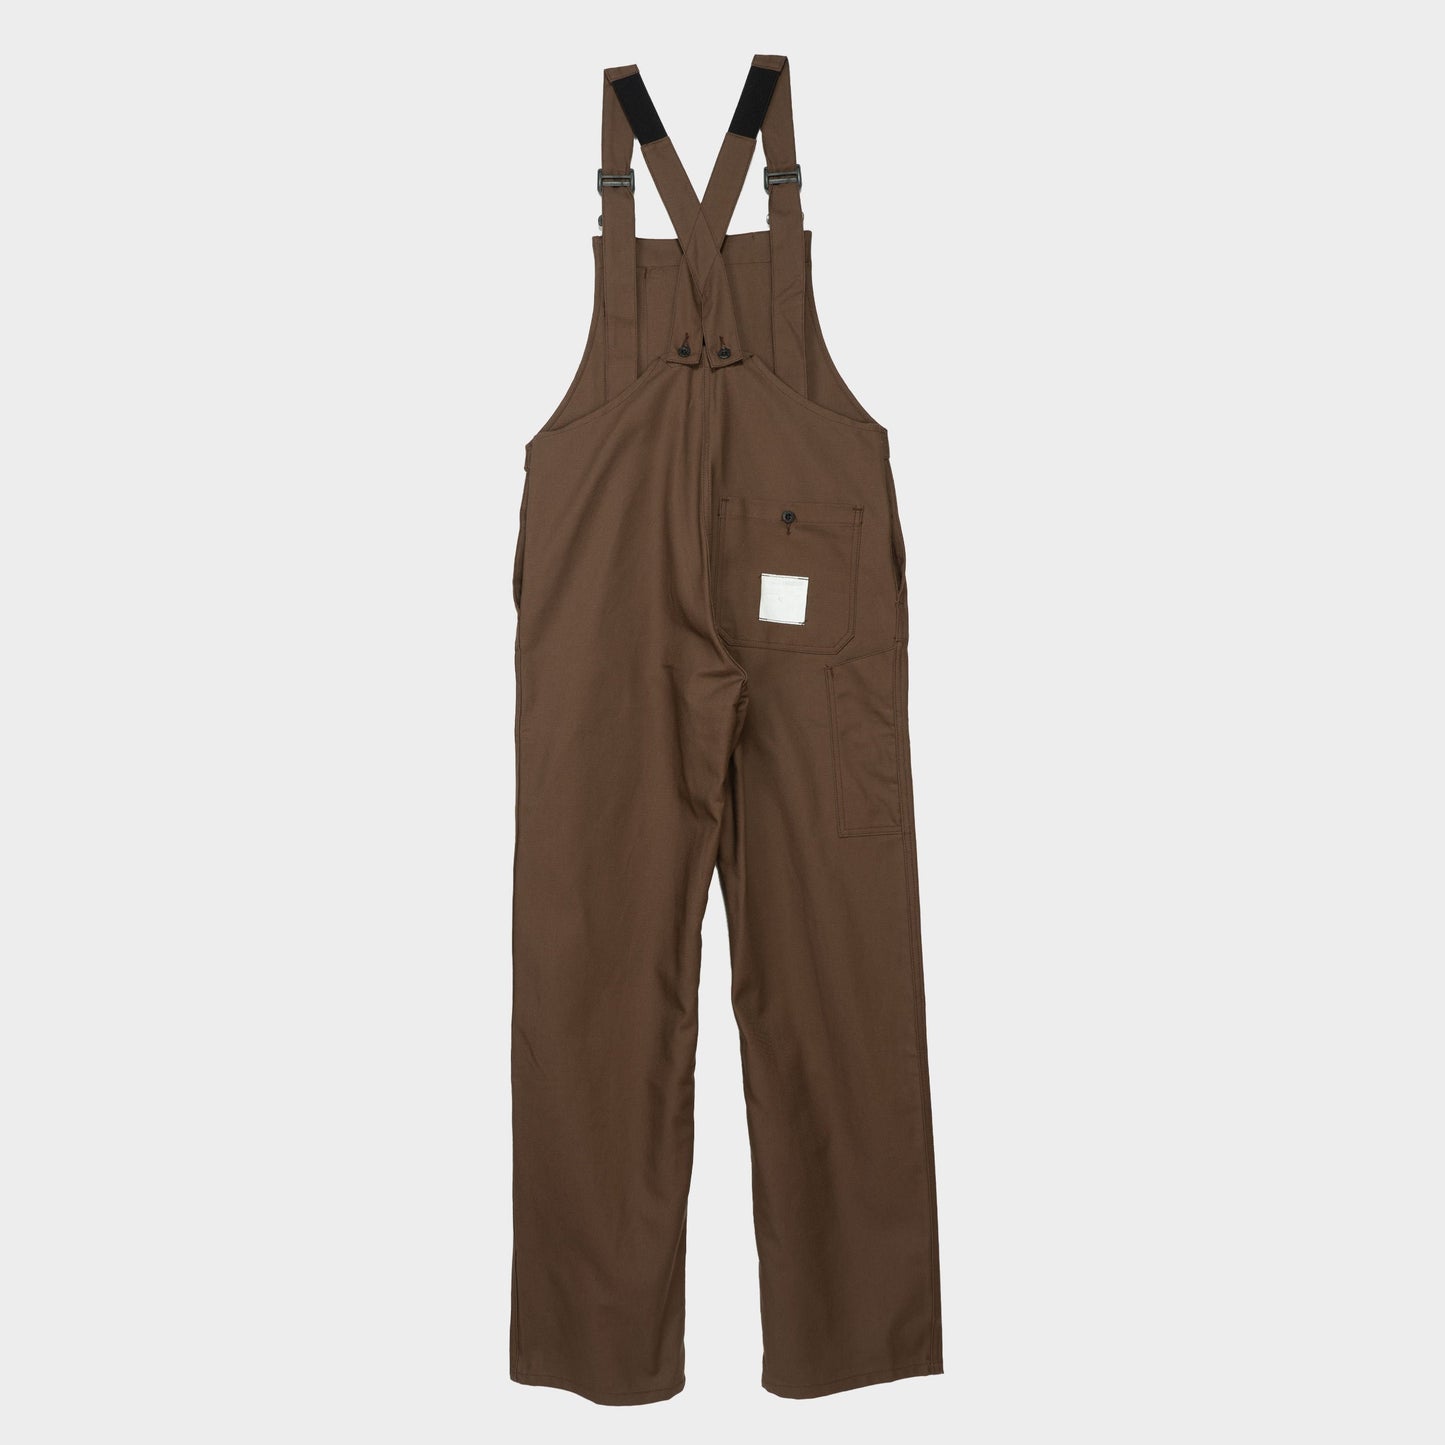 Le Laboureur for Gardenheir French Cotton Overalls in Brown